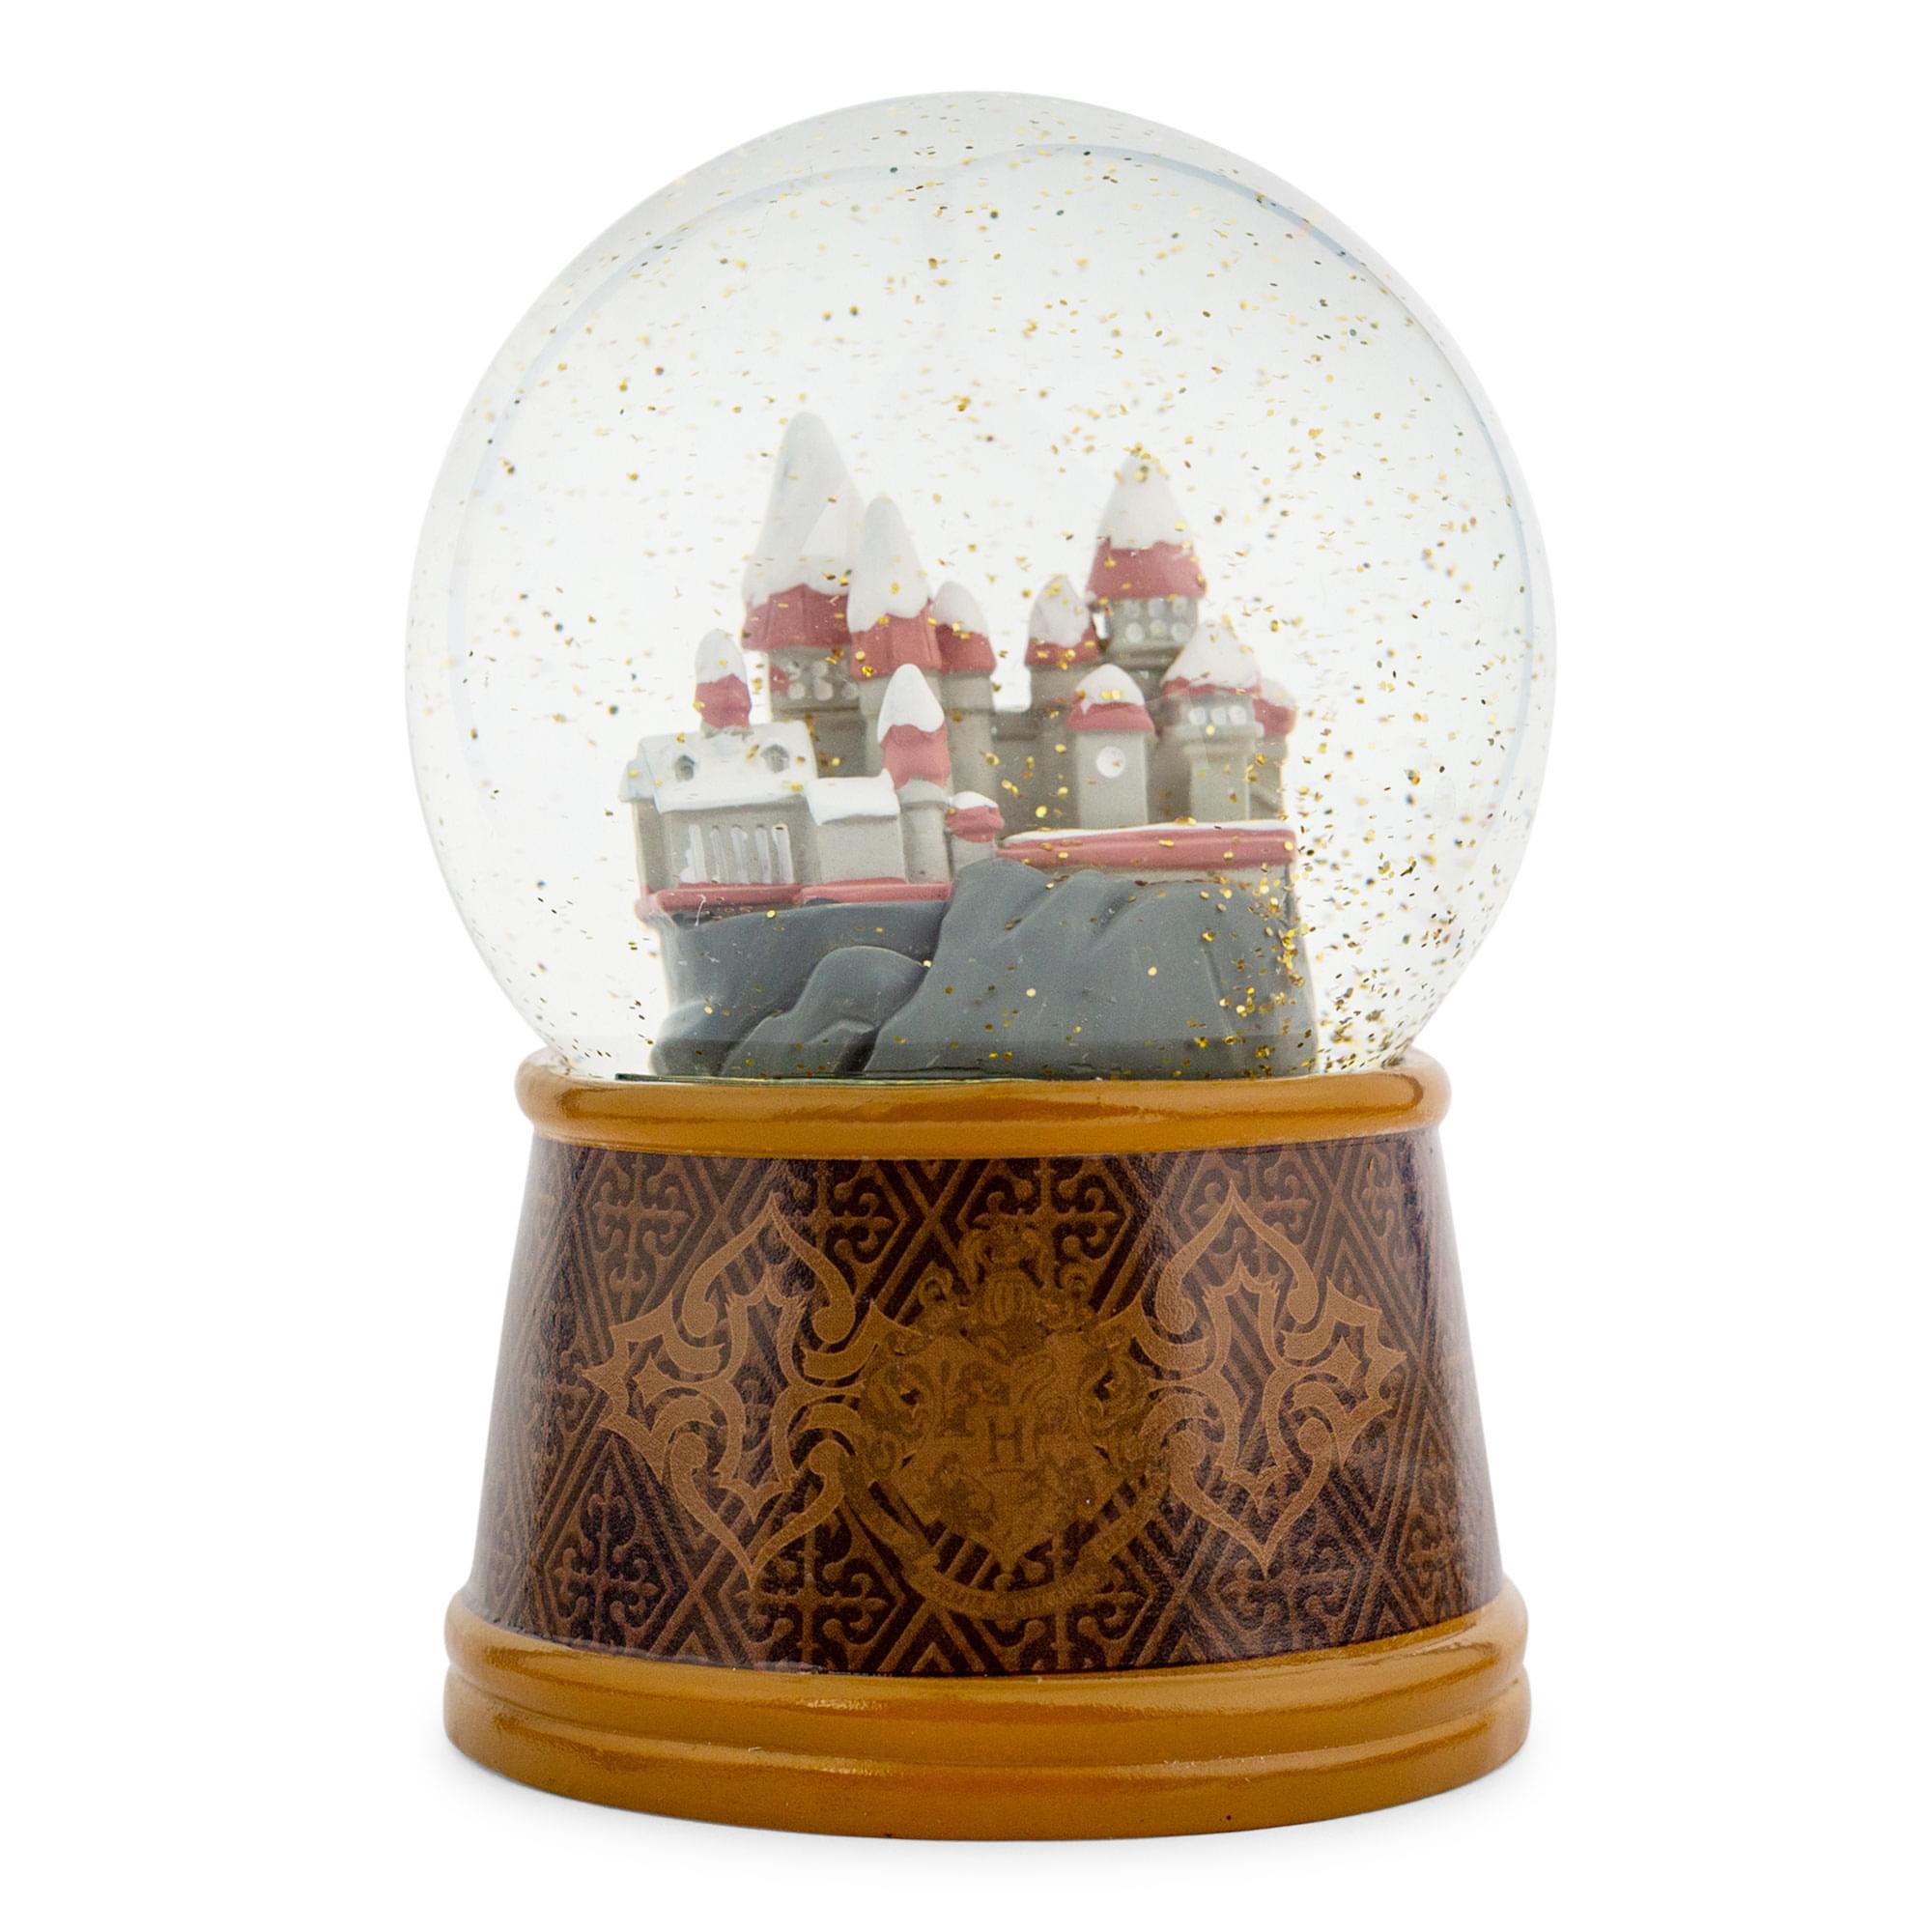 Harry Potter Hogwarts Castle Collectible Snow Globe , 6 Inches Tall